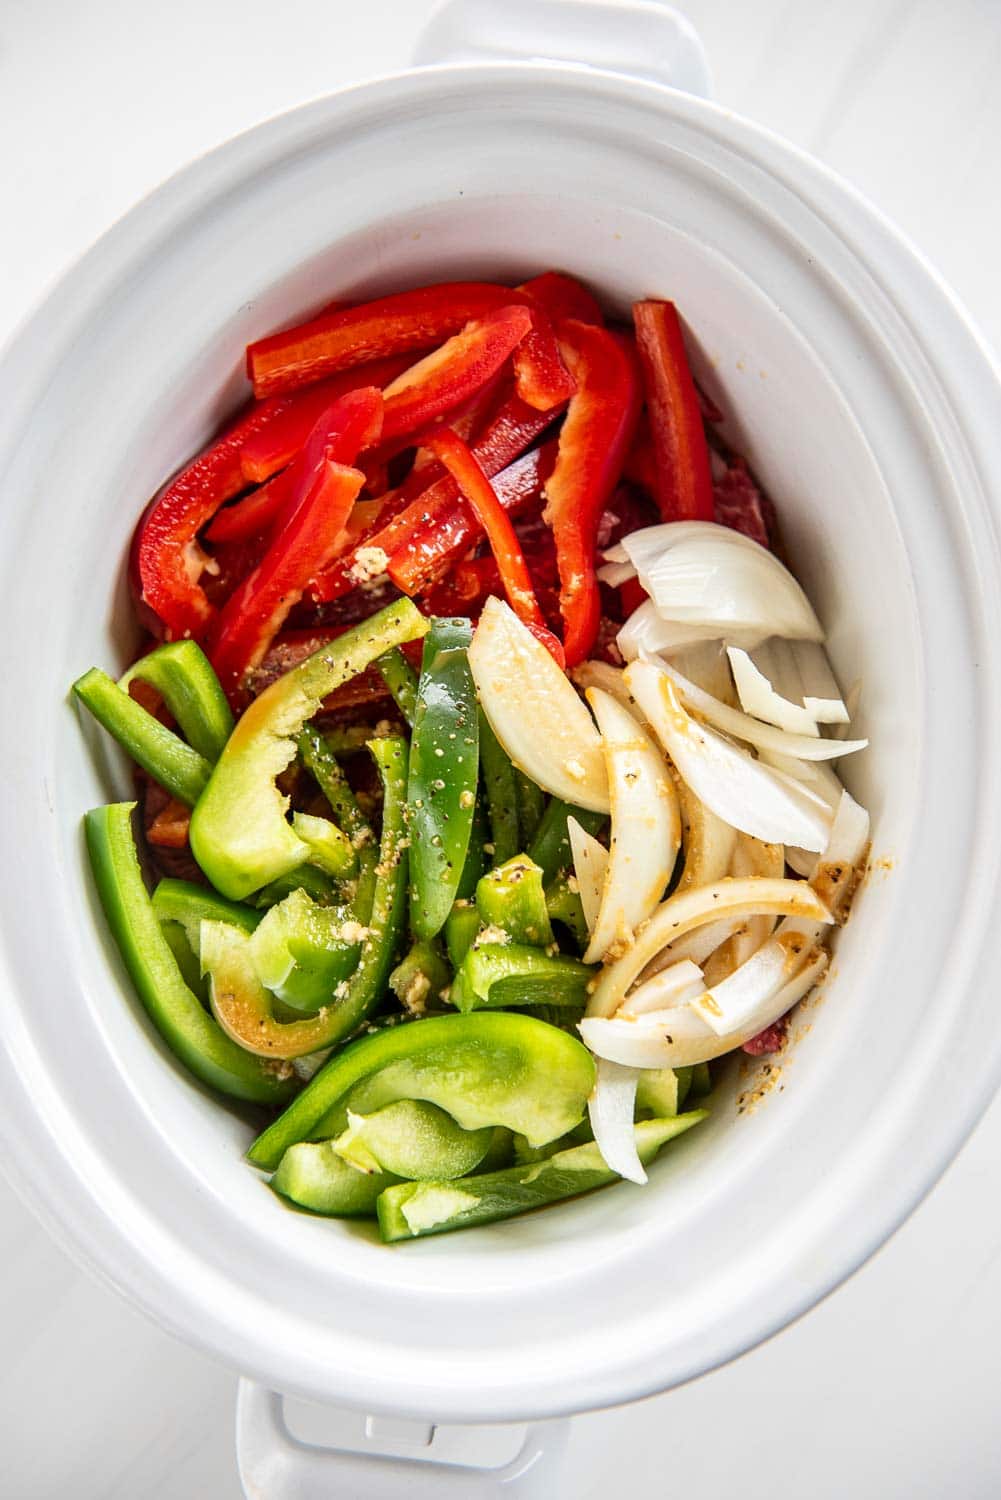 raw green peppers, red peppers, onions, all sliced inside of slow cooker with seasoning on top